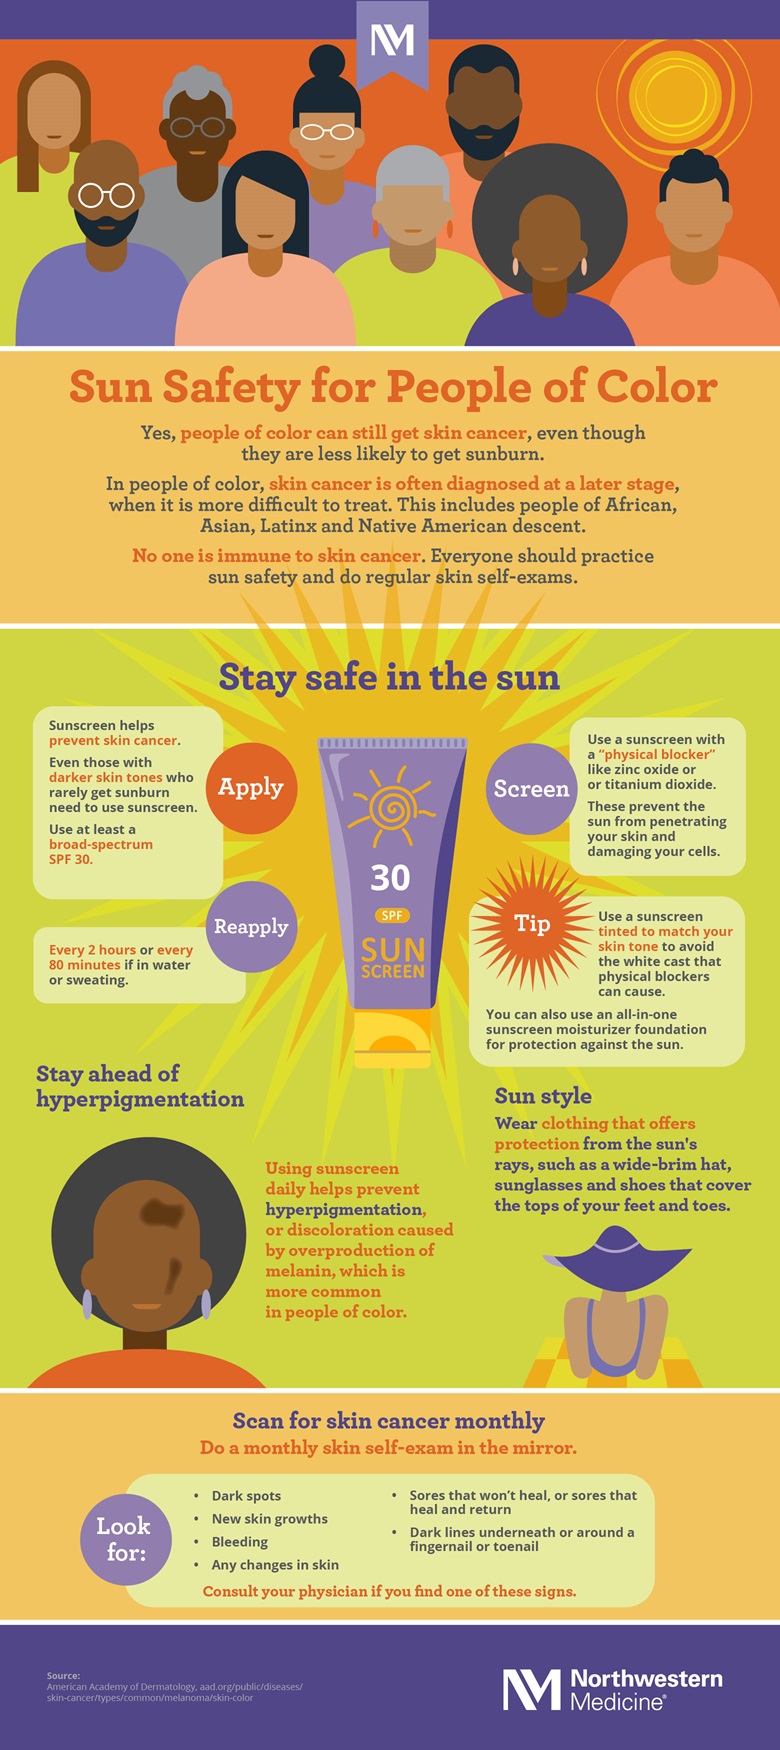 nm-skin-cancer-in-people-of-color-infographic.jpg